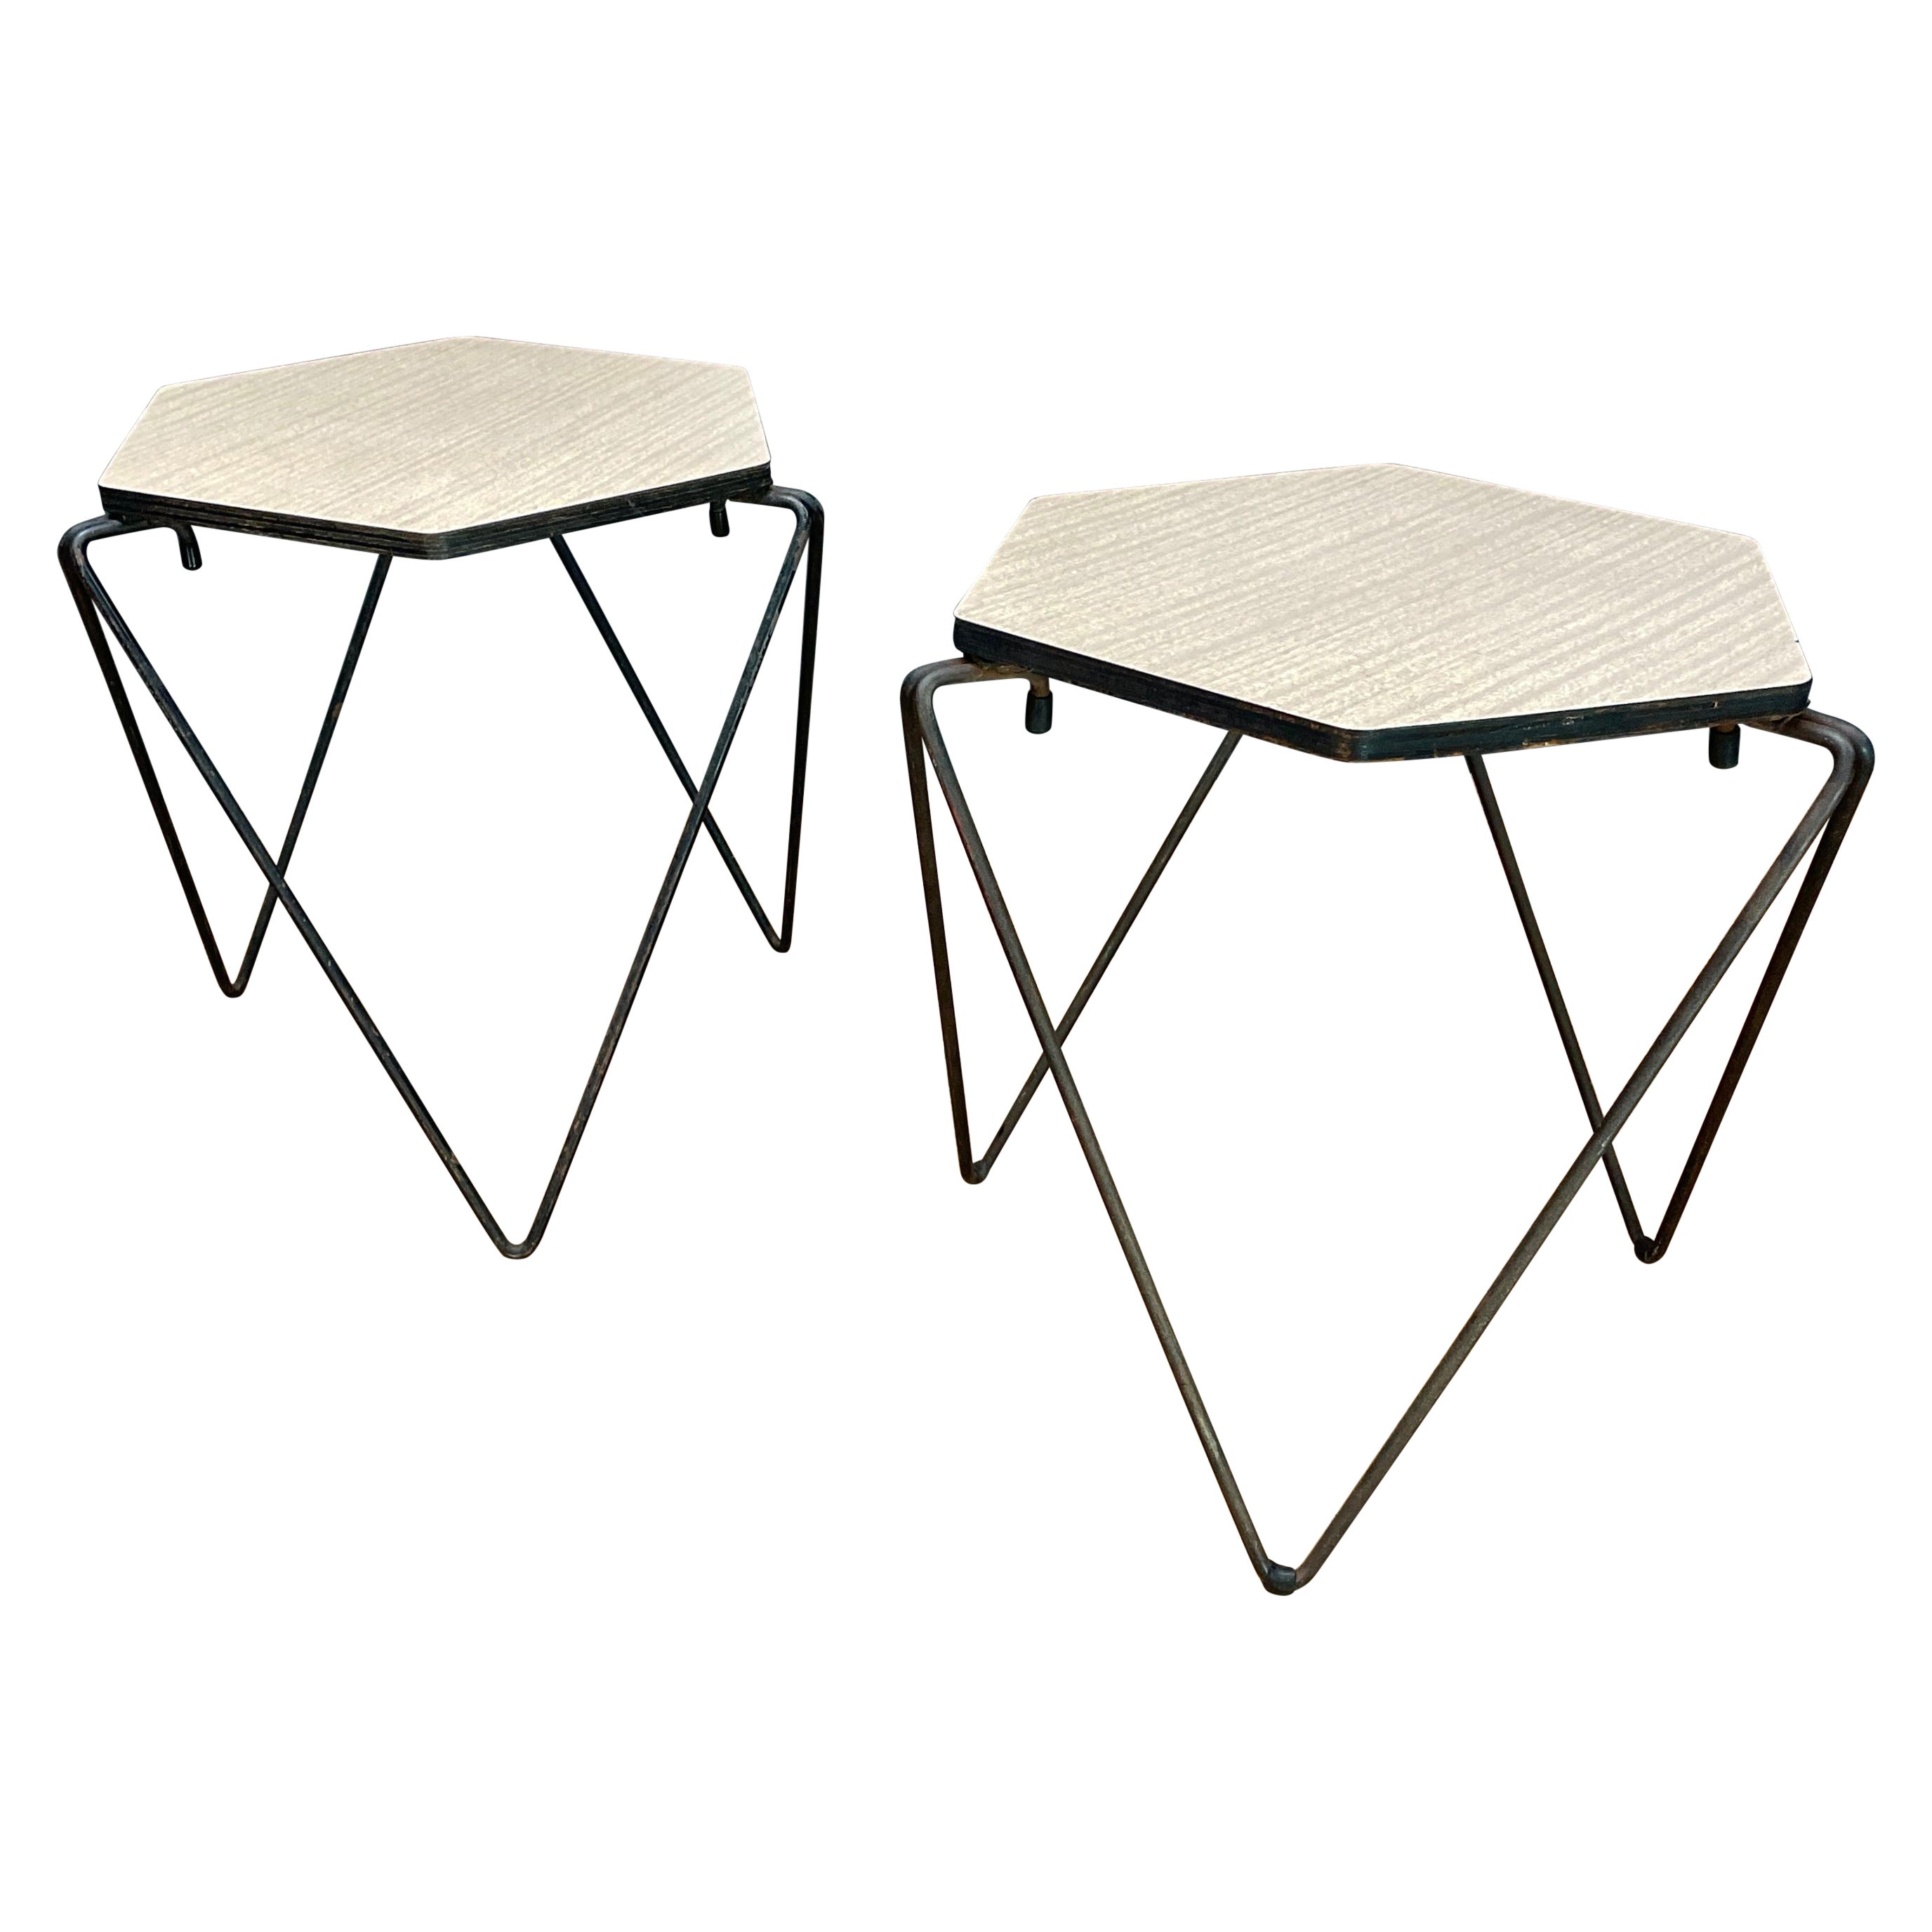 1950s Architects Prismatic Stacking Tables Pair Mid-Century Geometric Pedestal For Sale